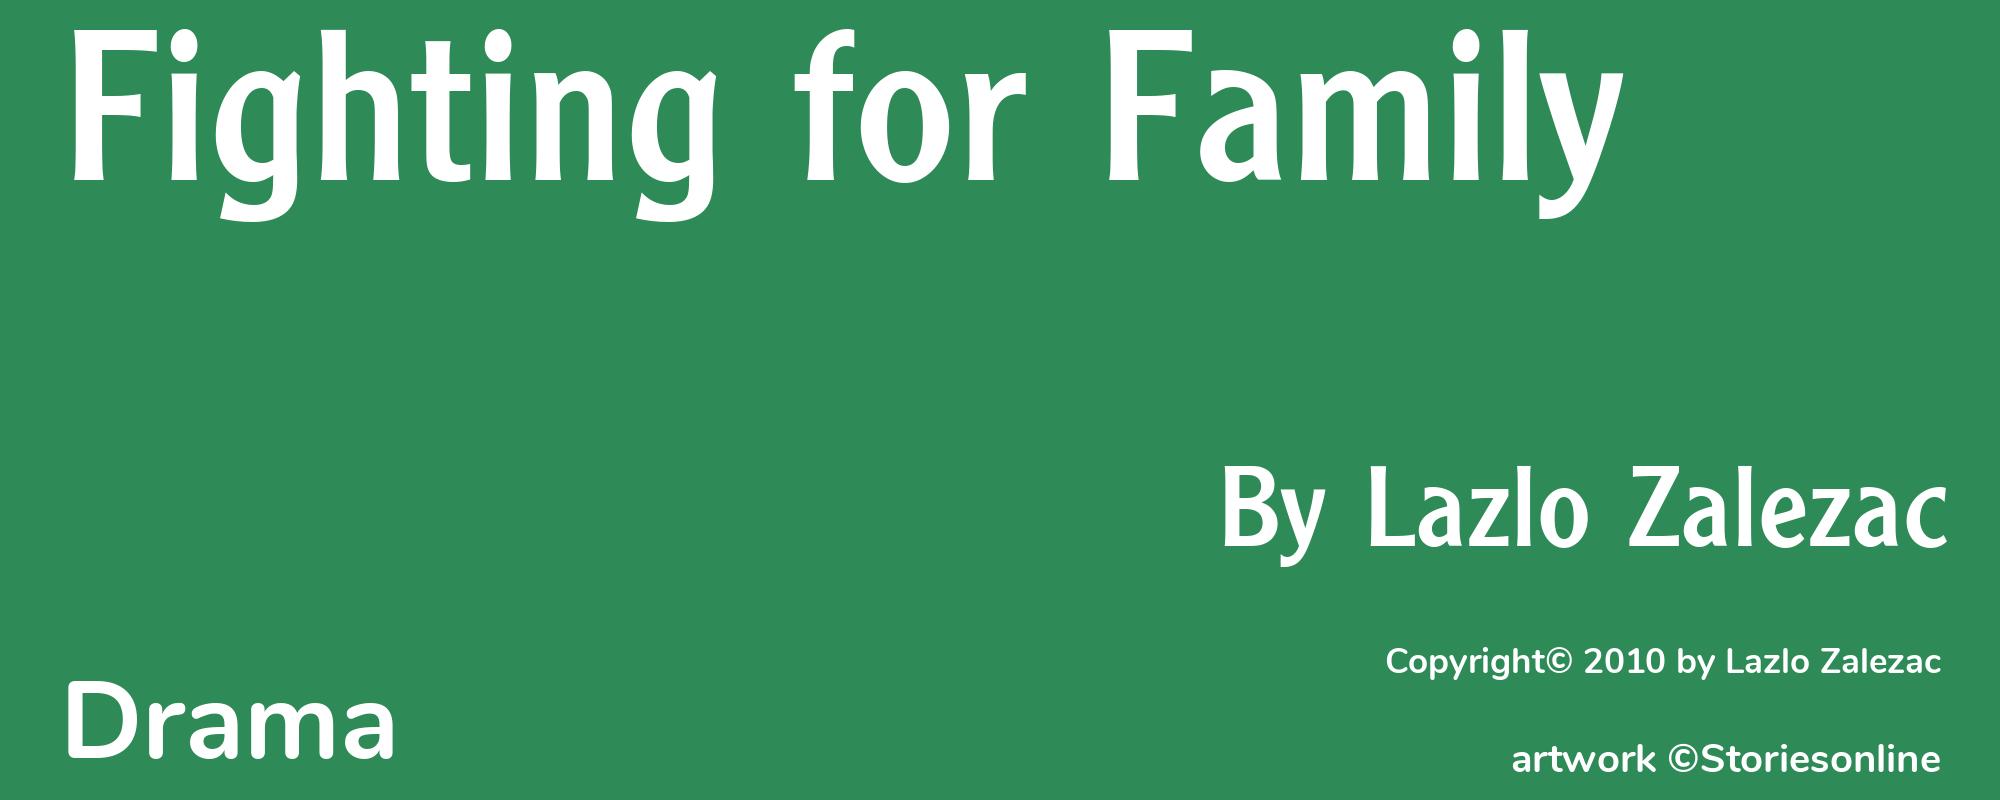 Fighting for Family - Cover